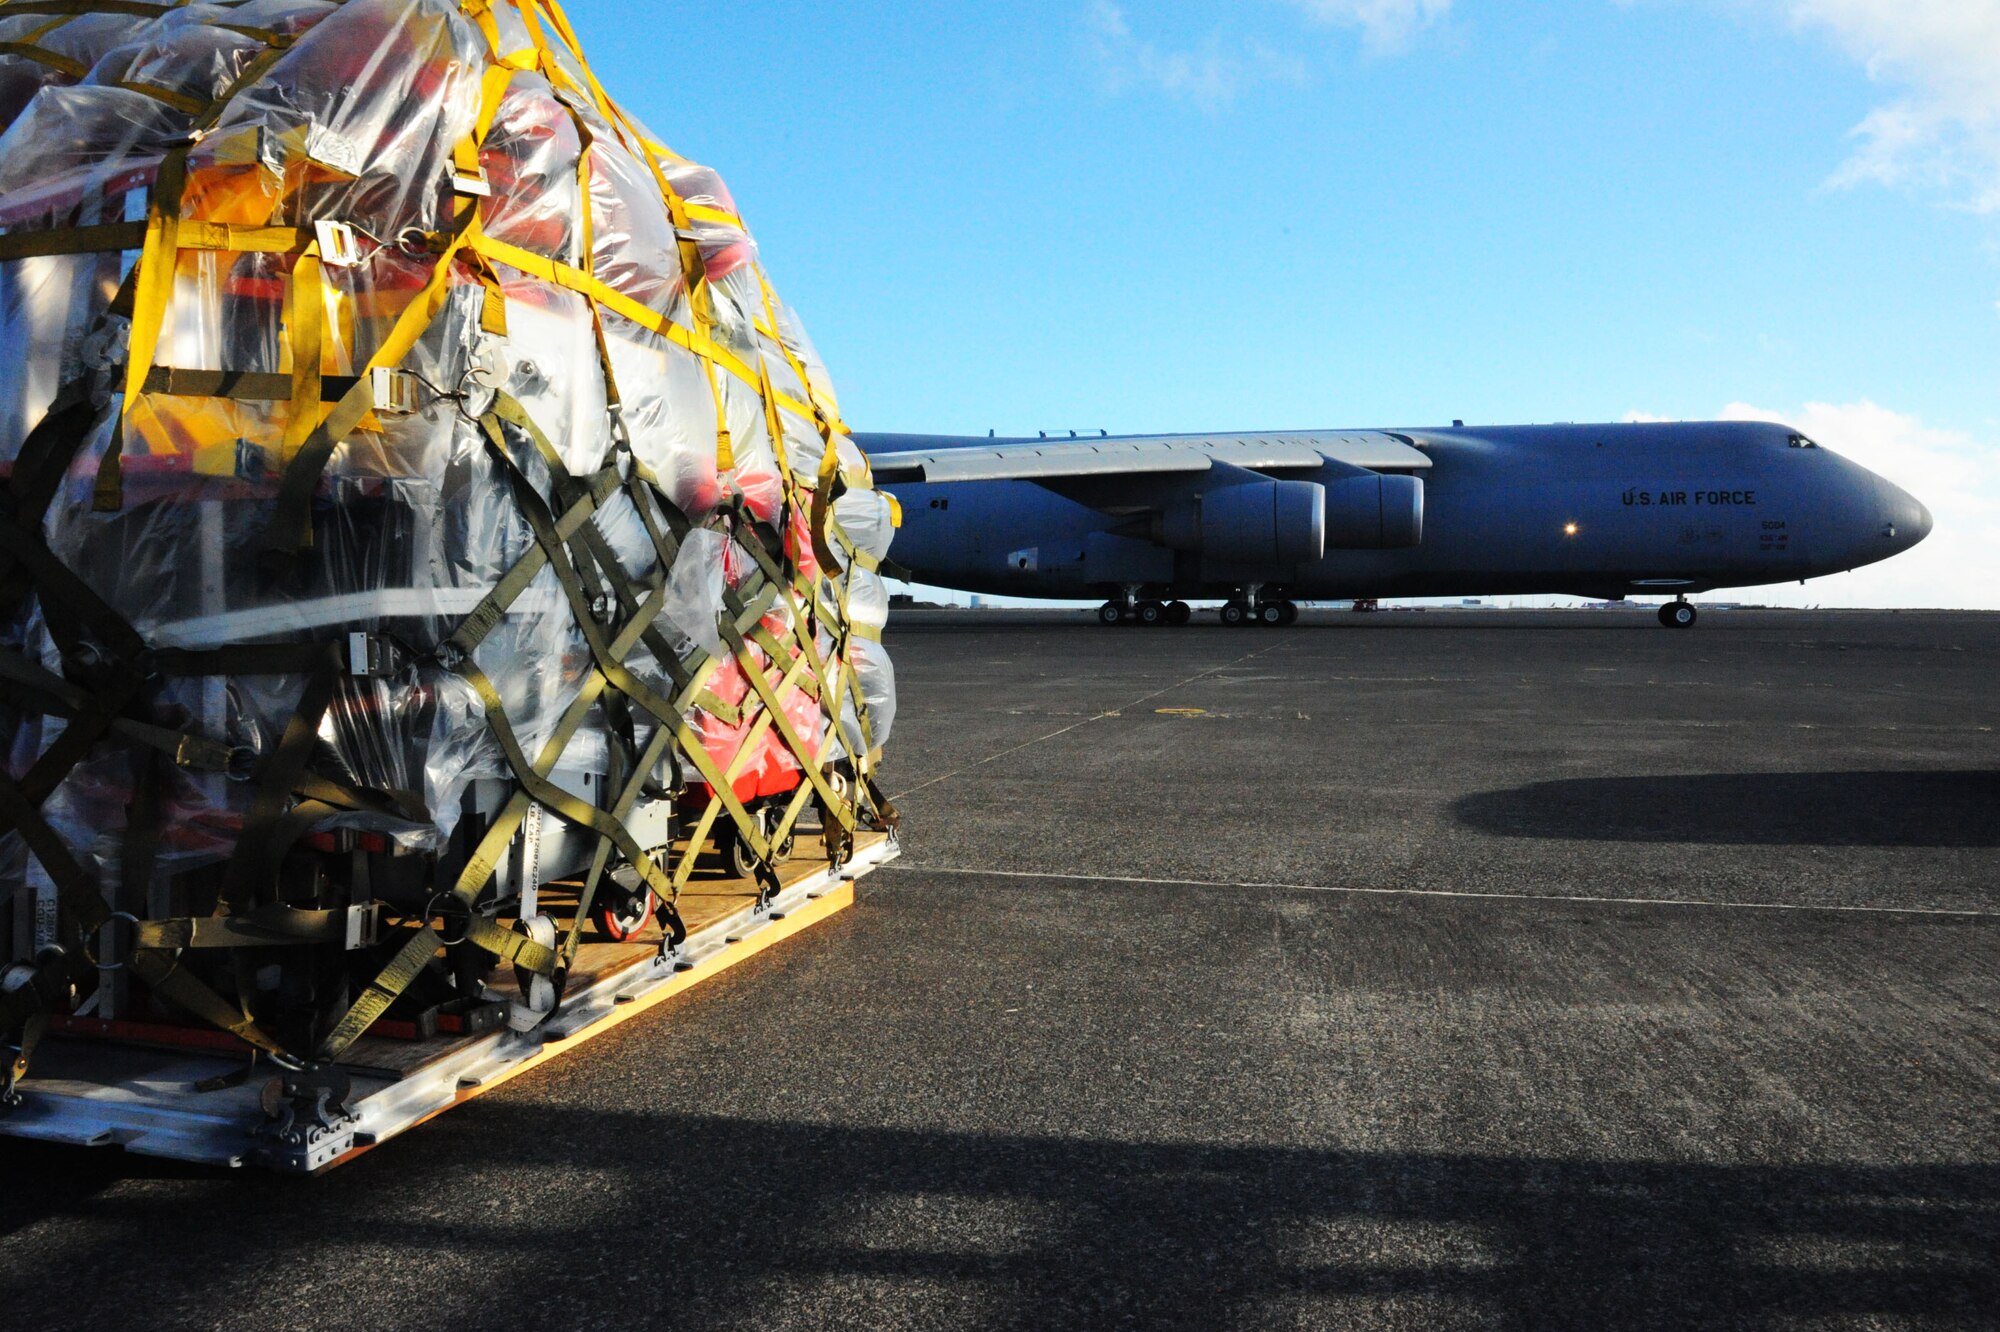 A U.S. Air Force C-5 Galaxy cargo aircraft taxis from the flightline at Keflavik International Airport, April 28, 2016 as equipment sits ready to be loaded. The equipment and approximately 200 Airmen assigned to the 104th Fighter Wing, Barnes Air National Guard Base, Mass., completed the Icelandic Air Surveillance mission and will travel to Estonia to conduct training and partnership operations there. (U.S. Air Force photo by Master Sgt. Kevin Nichols/Released)